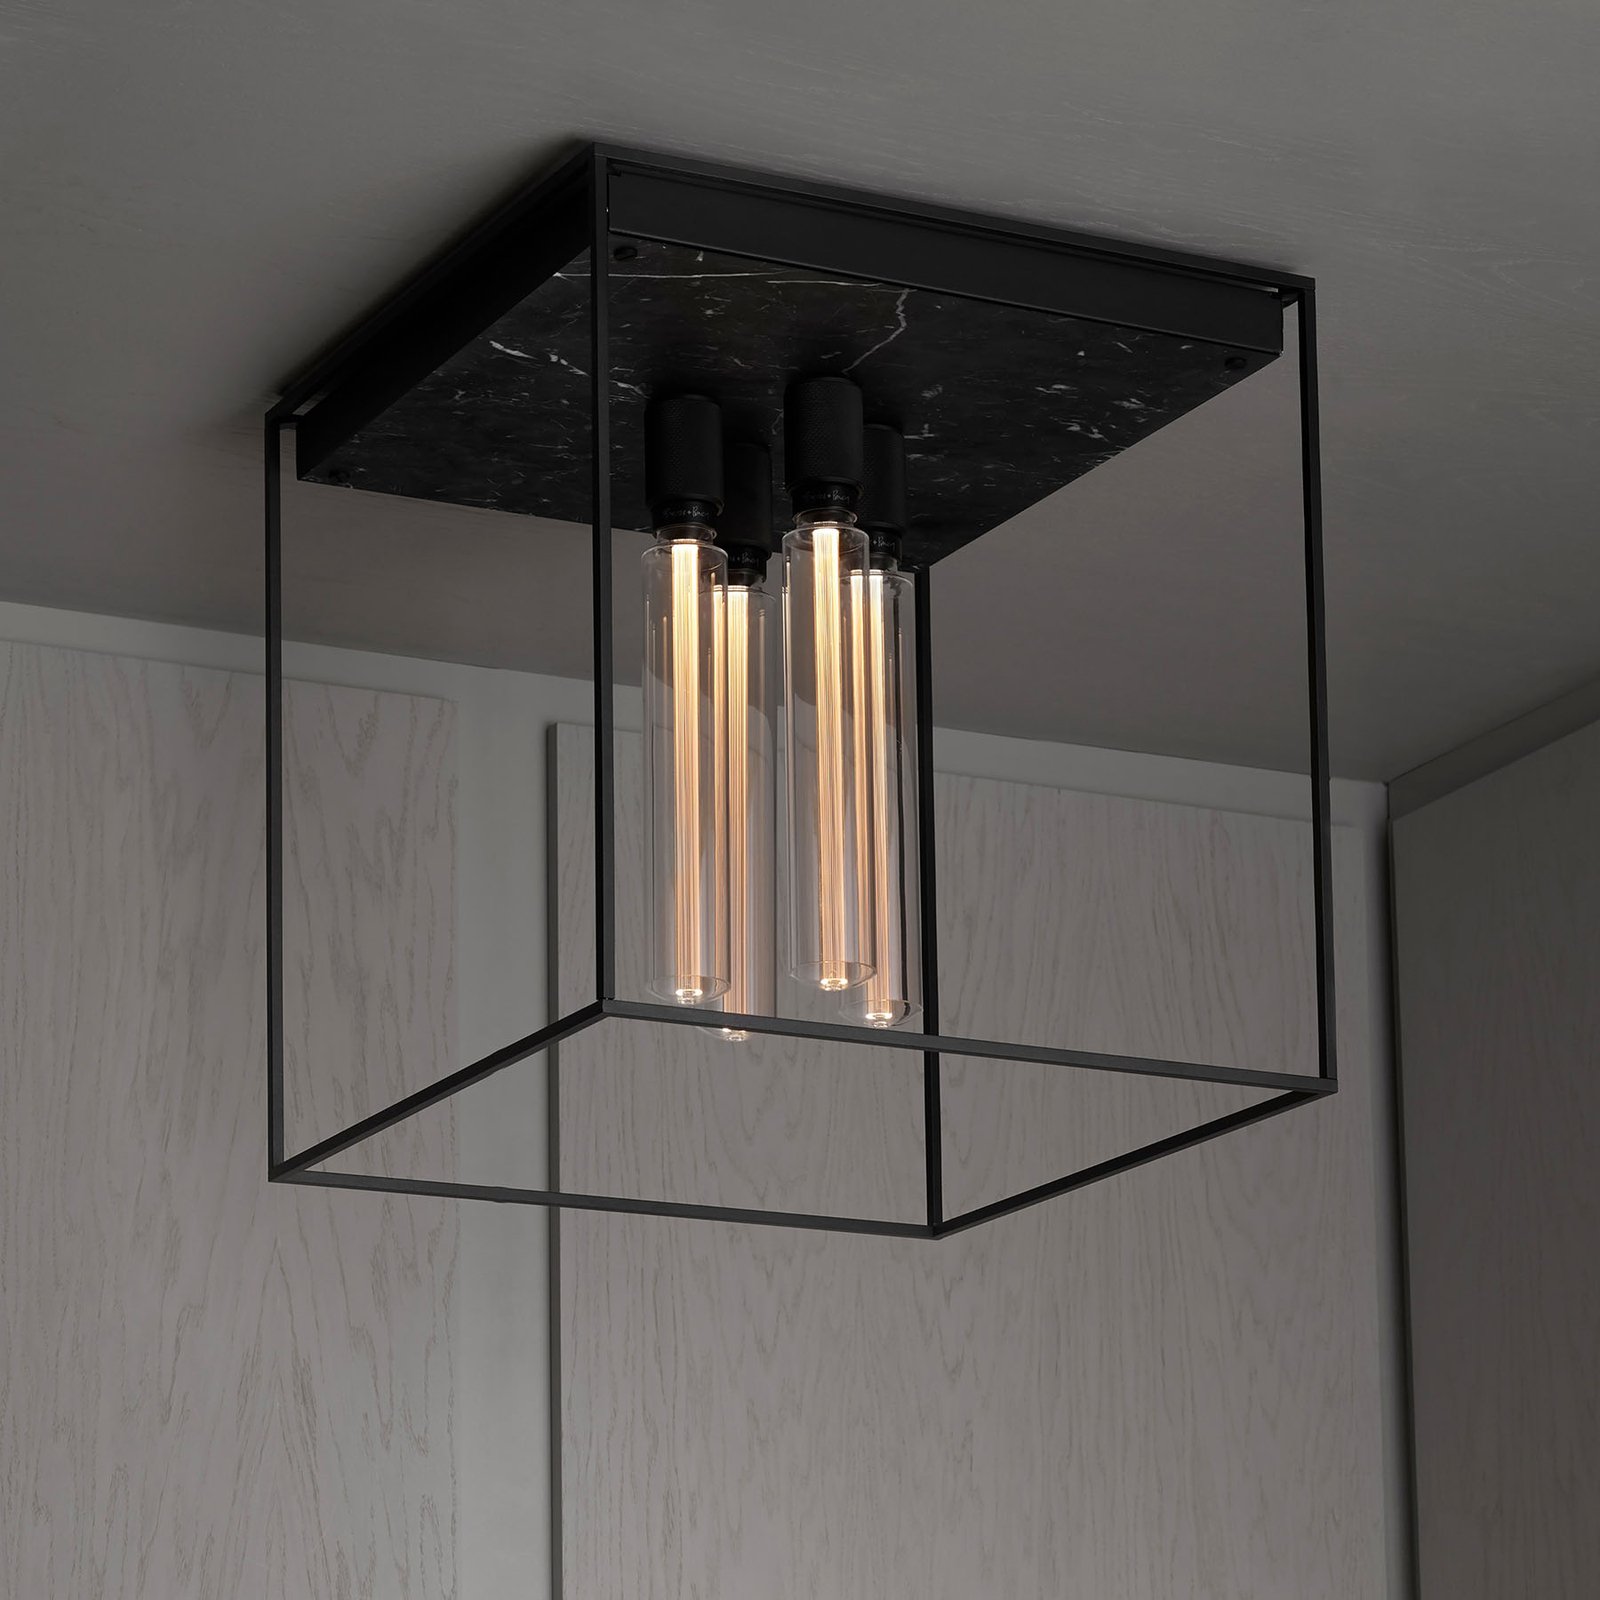 Buster + Punch Caged Ceiling 4.0 LED marmer black